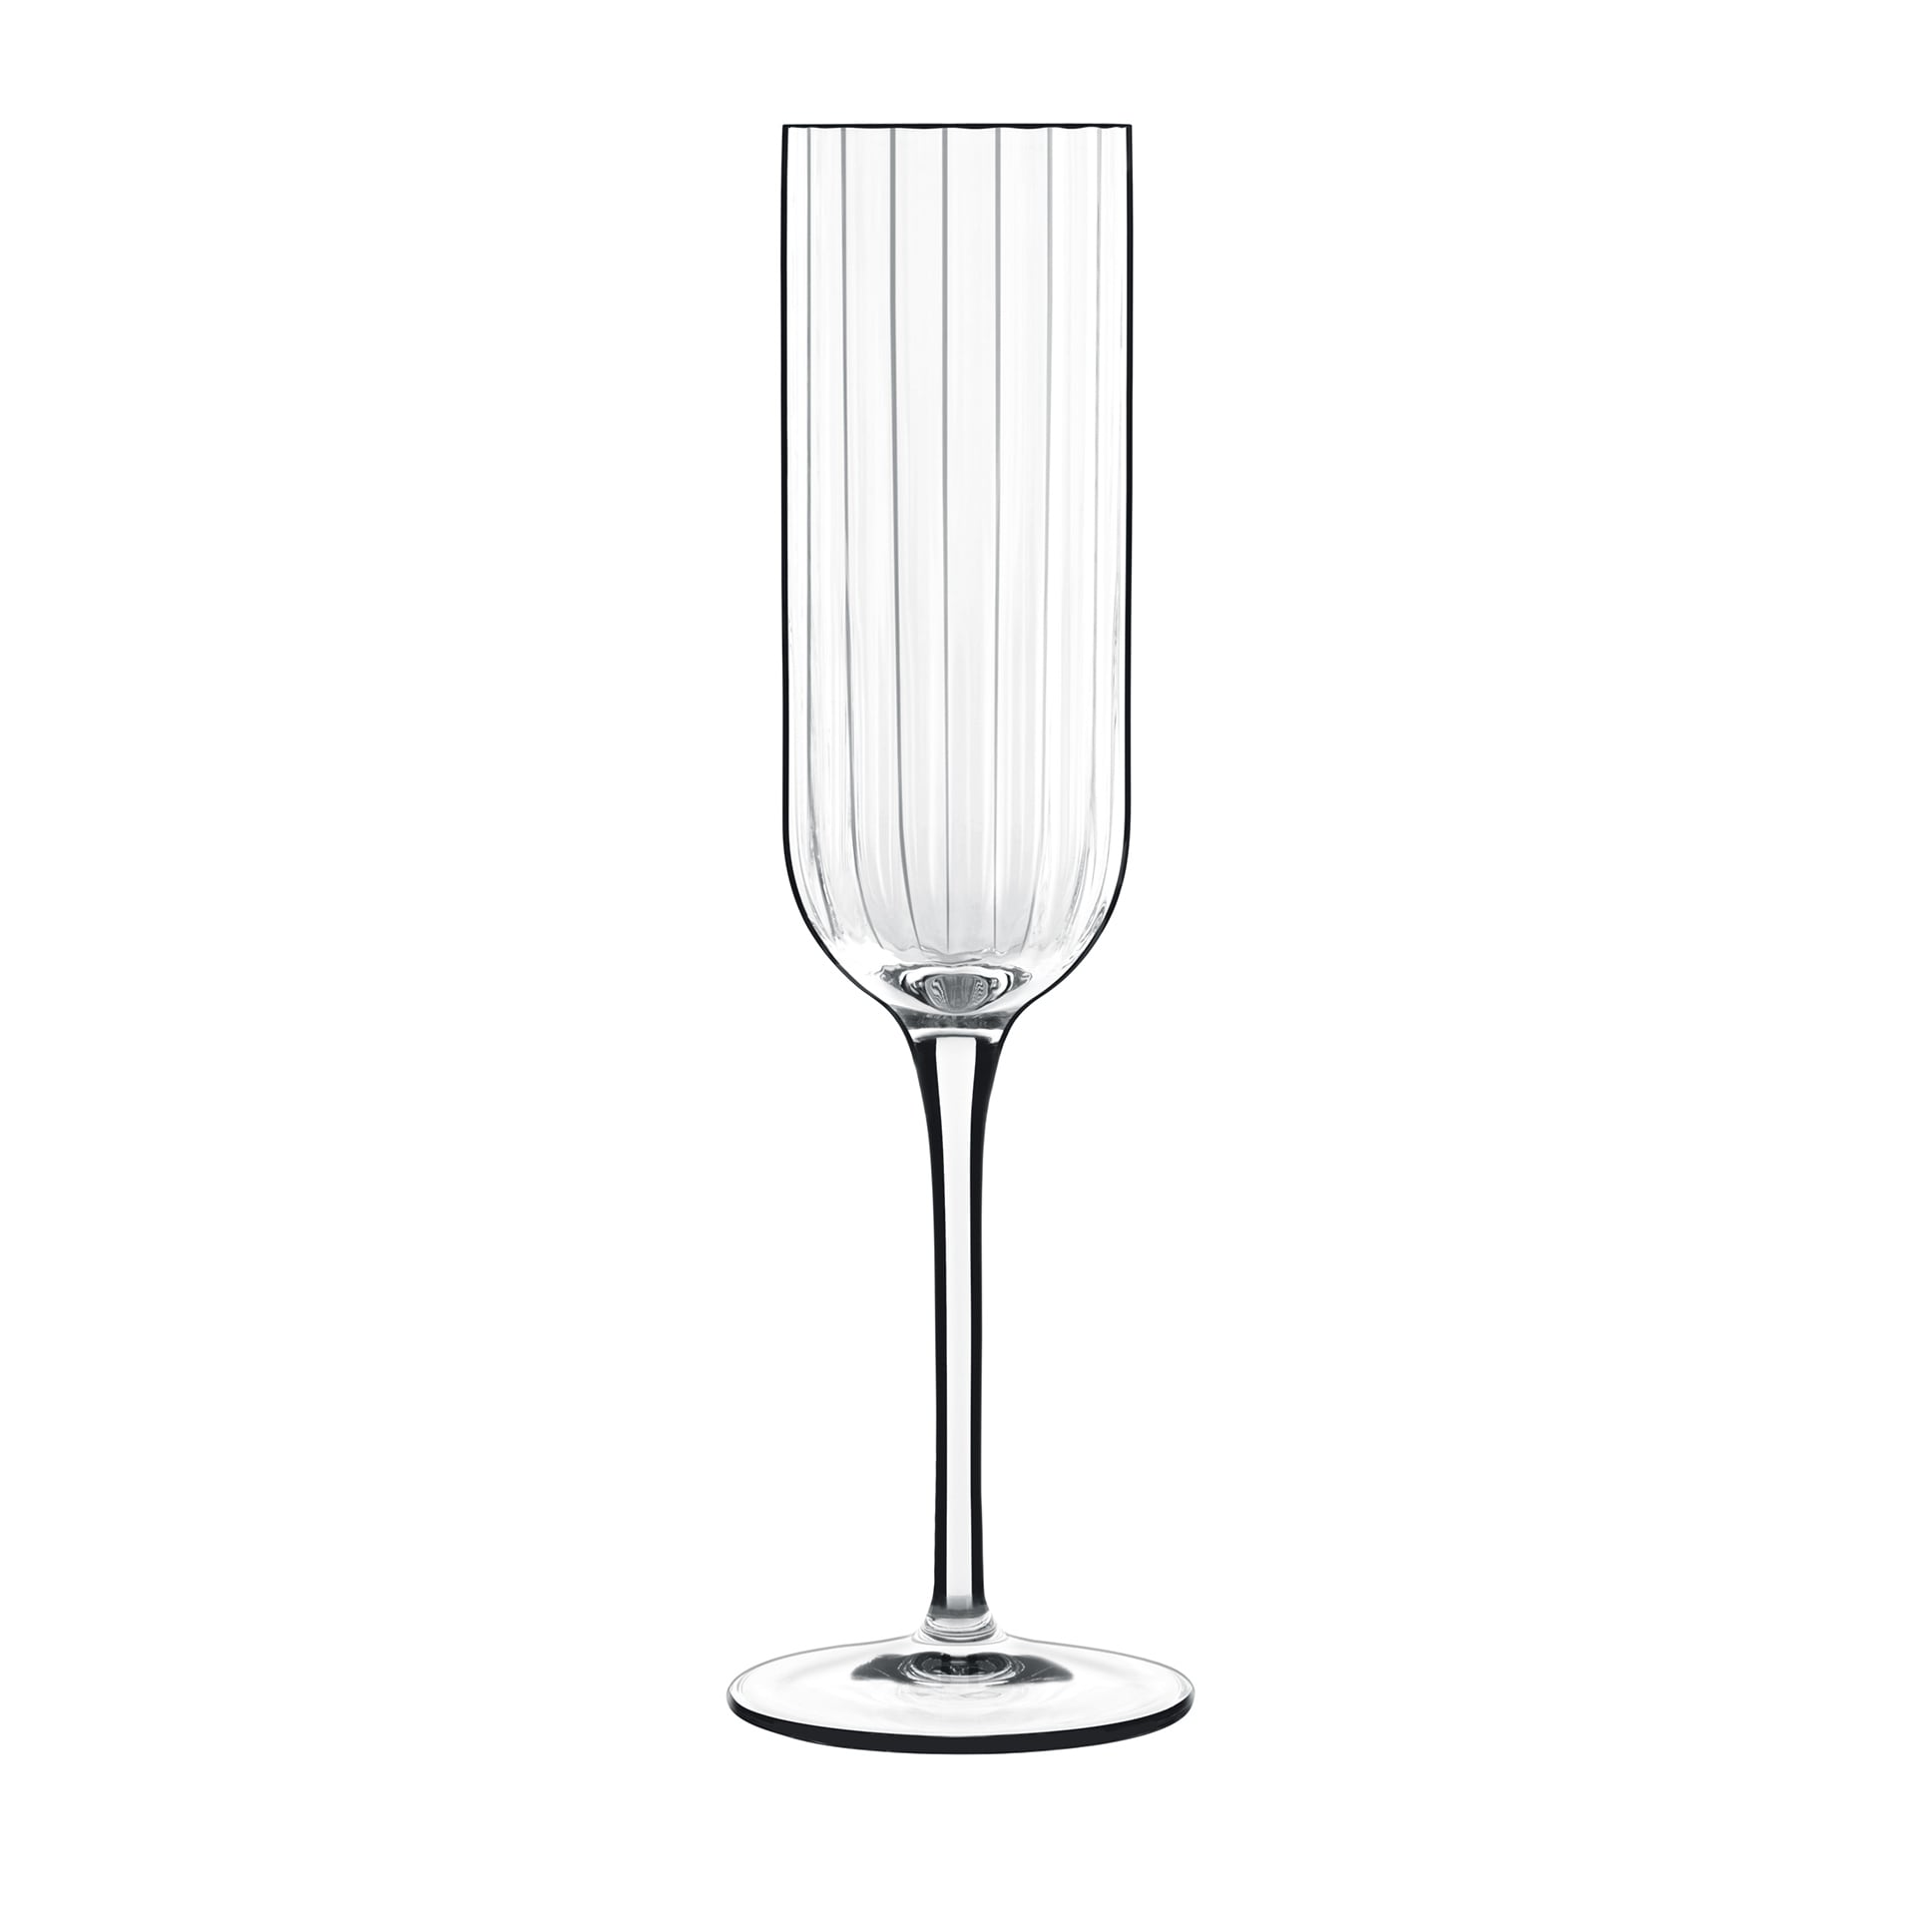 https://ak1.ostkcdn.com/images/products/is/images/direct/fc597a3a3bfe7ecb3f7dcd99df30f4e67a4f69b4/Luigi-Bormioli-Bach-7-oz.-Flute-Champagen-Prosecco%2C-Set-of-4.jpg